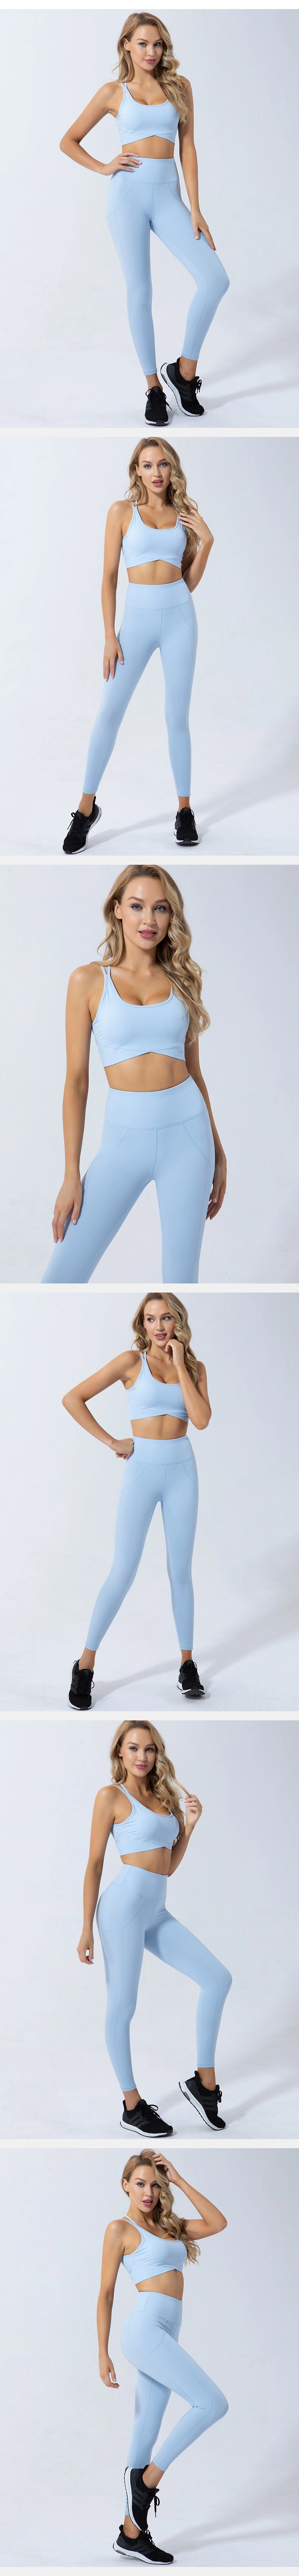 Women Solid Color Sport Bra and Yoga Pants Two Piece Gym Exercise Outfit Clothing Fitness Set